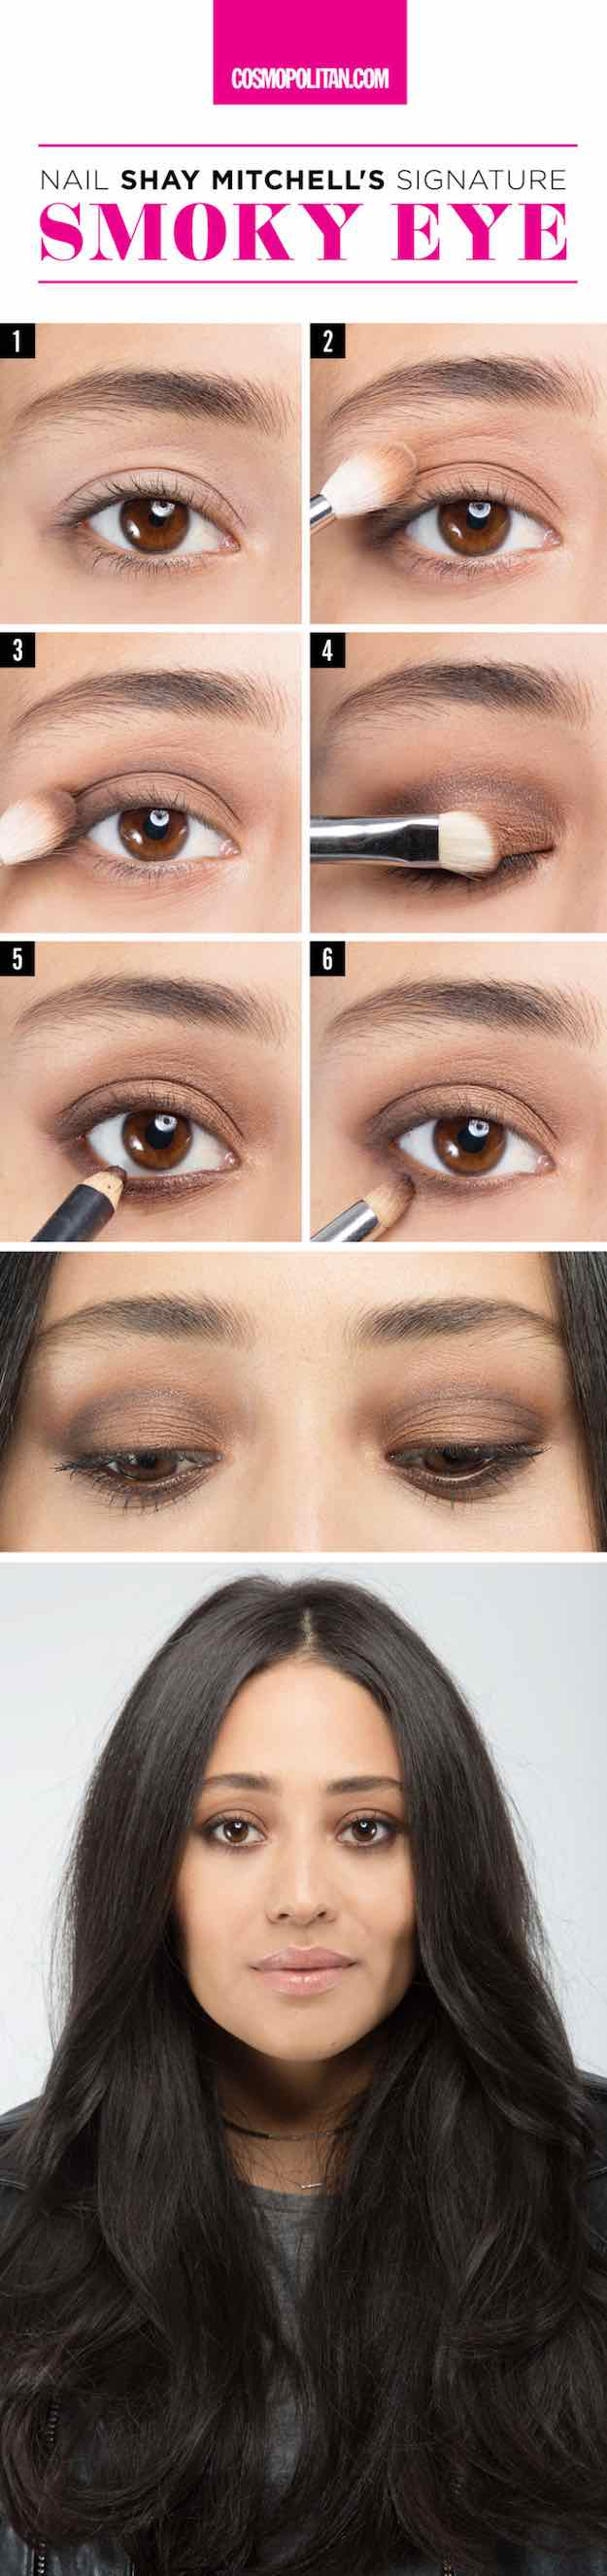 Makeup For Brown Eyes 31 Awesome Makeup Tutorials For Brown Eyes The Goddess